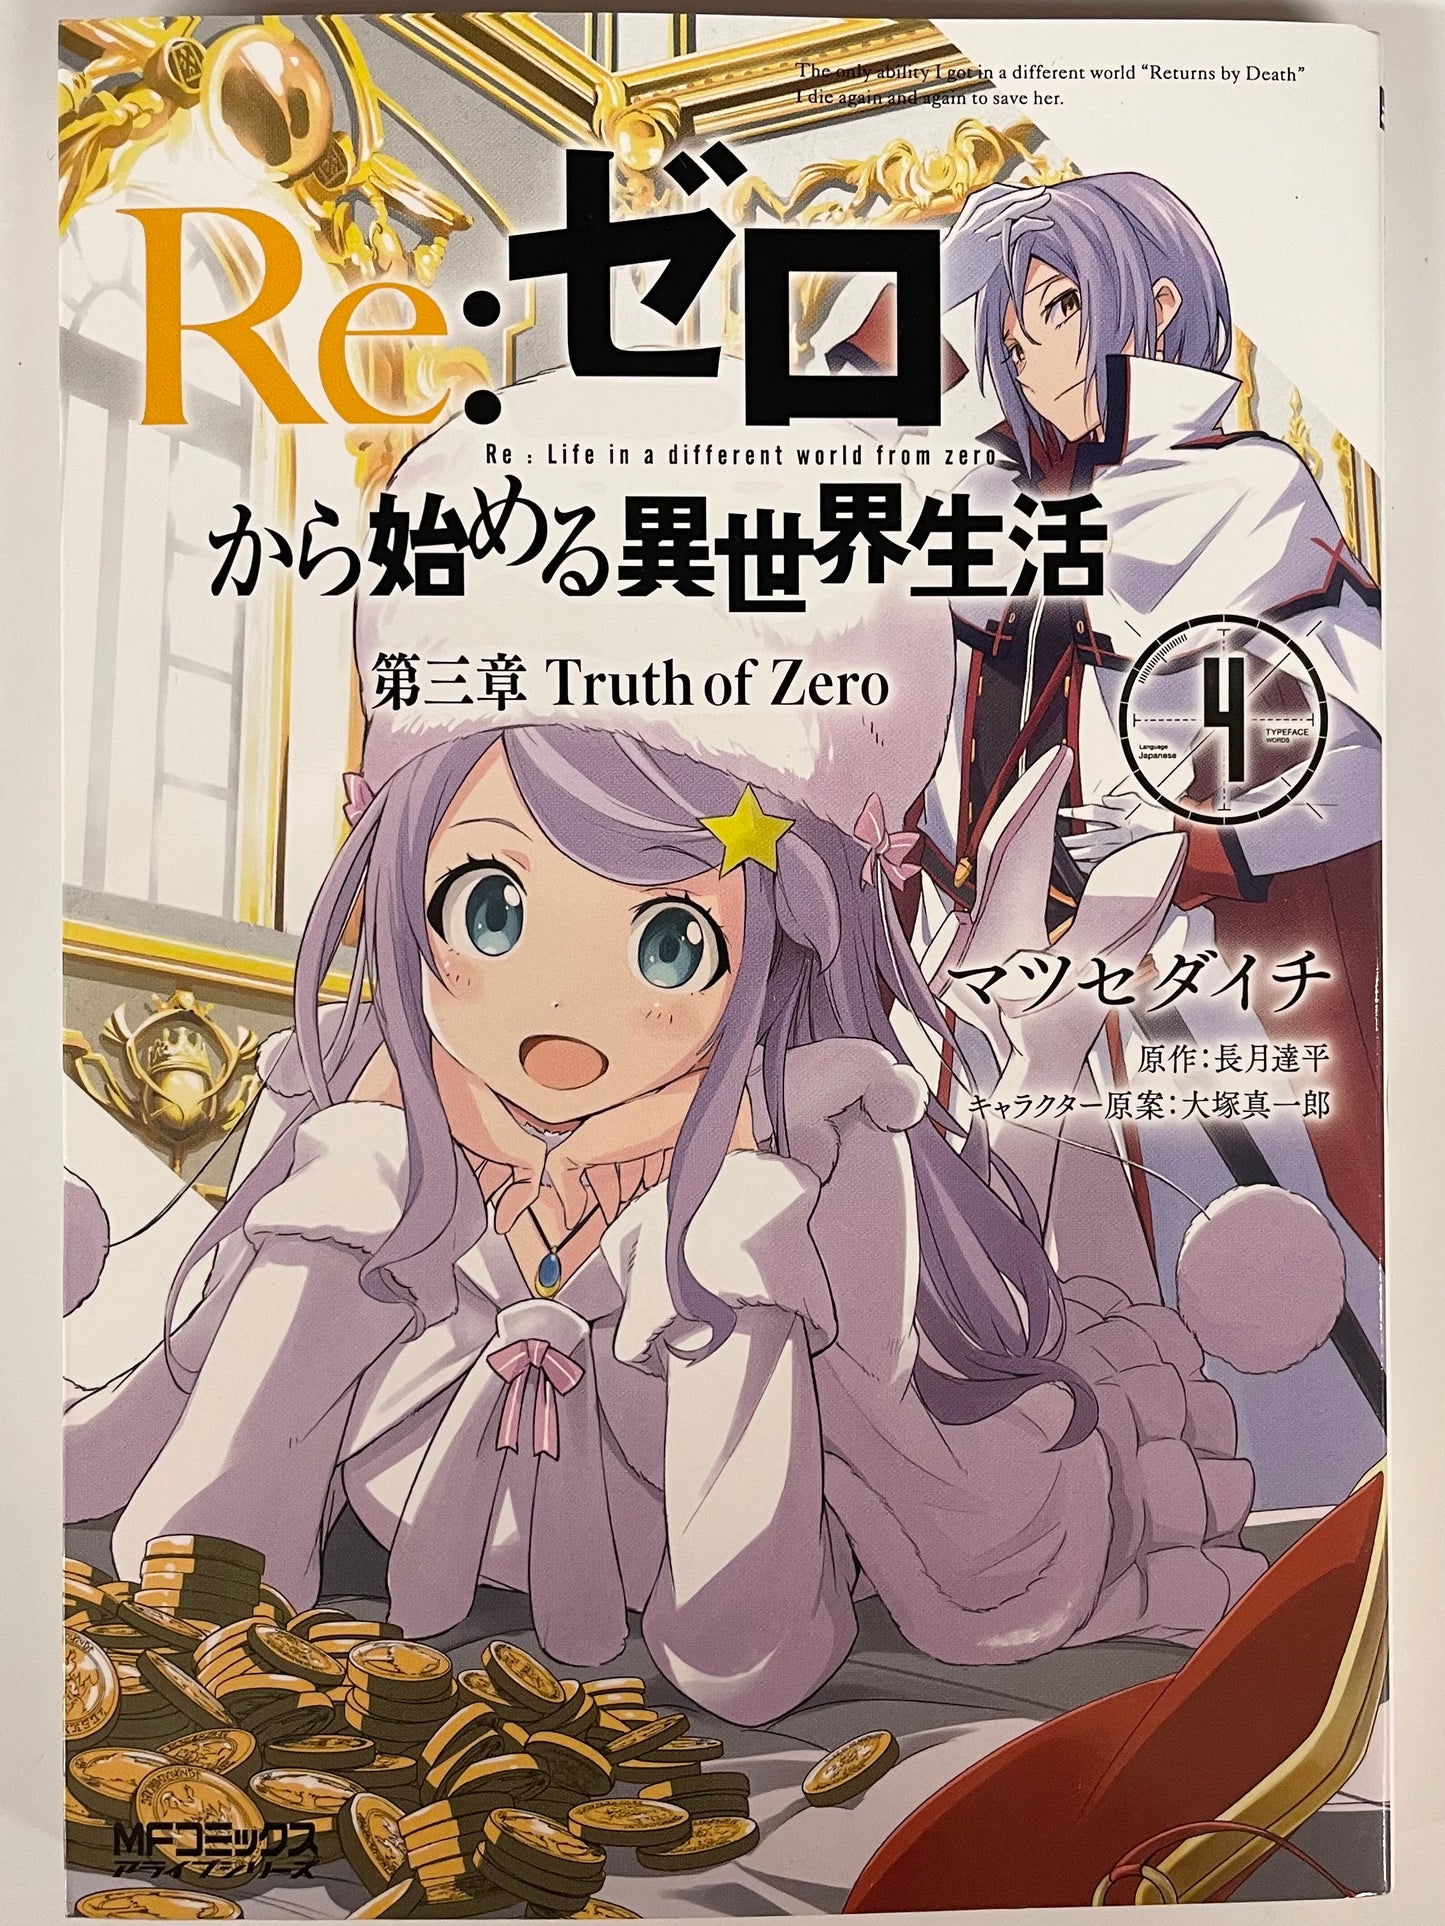 Re:Zero Ep-3 Vol.4-Starting Life In Another World-Official Japanese Edition